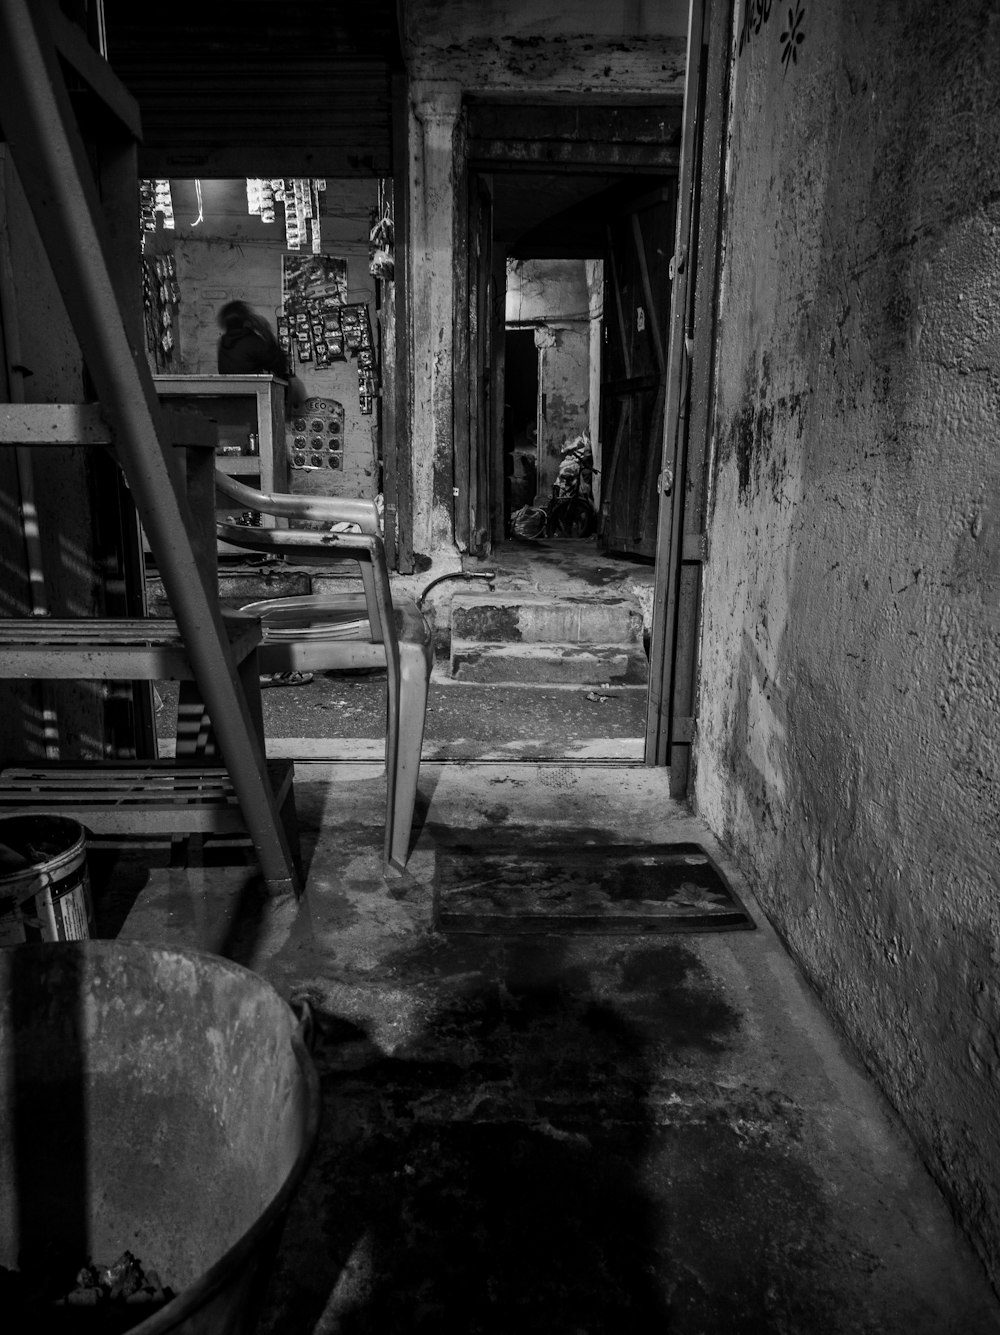 a black and white photo of a dirty room